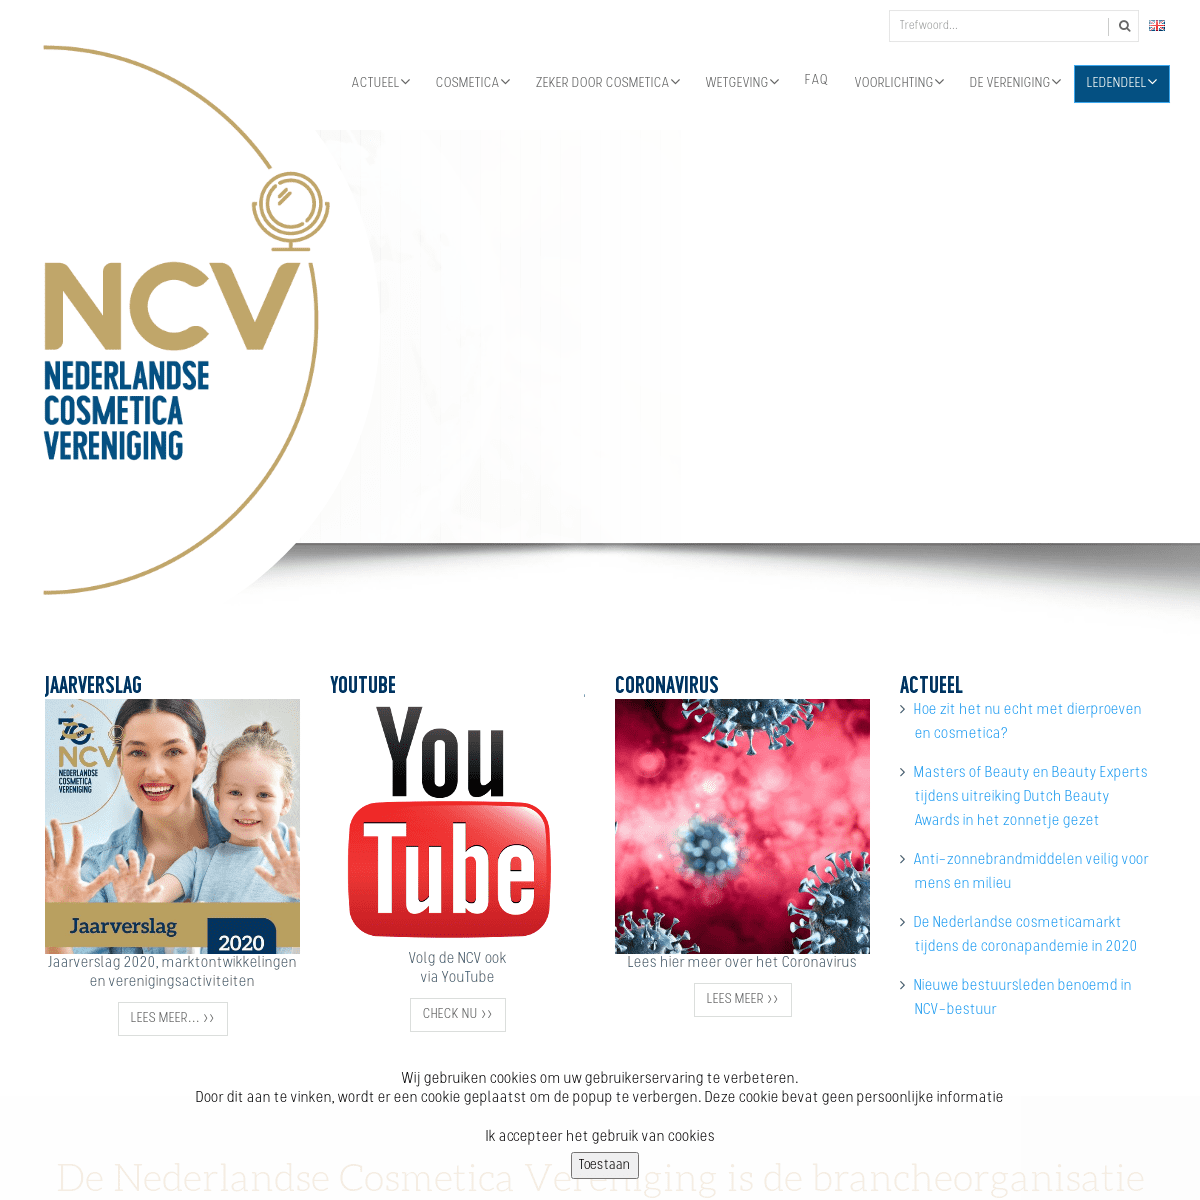 A complete backup of https://ncv-cosmetica.nl